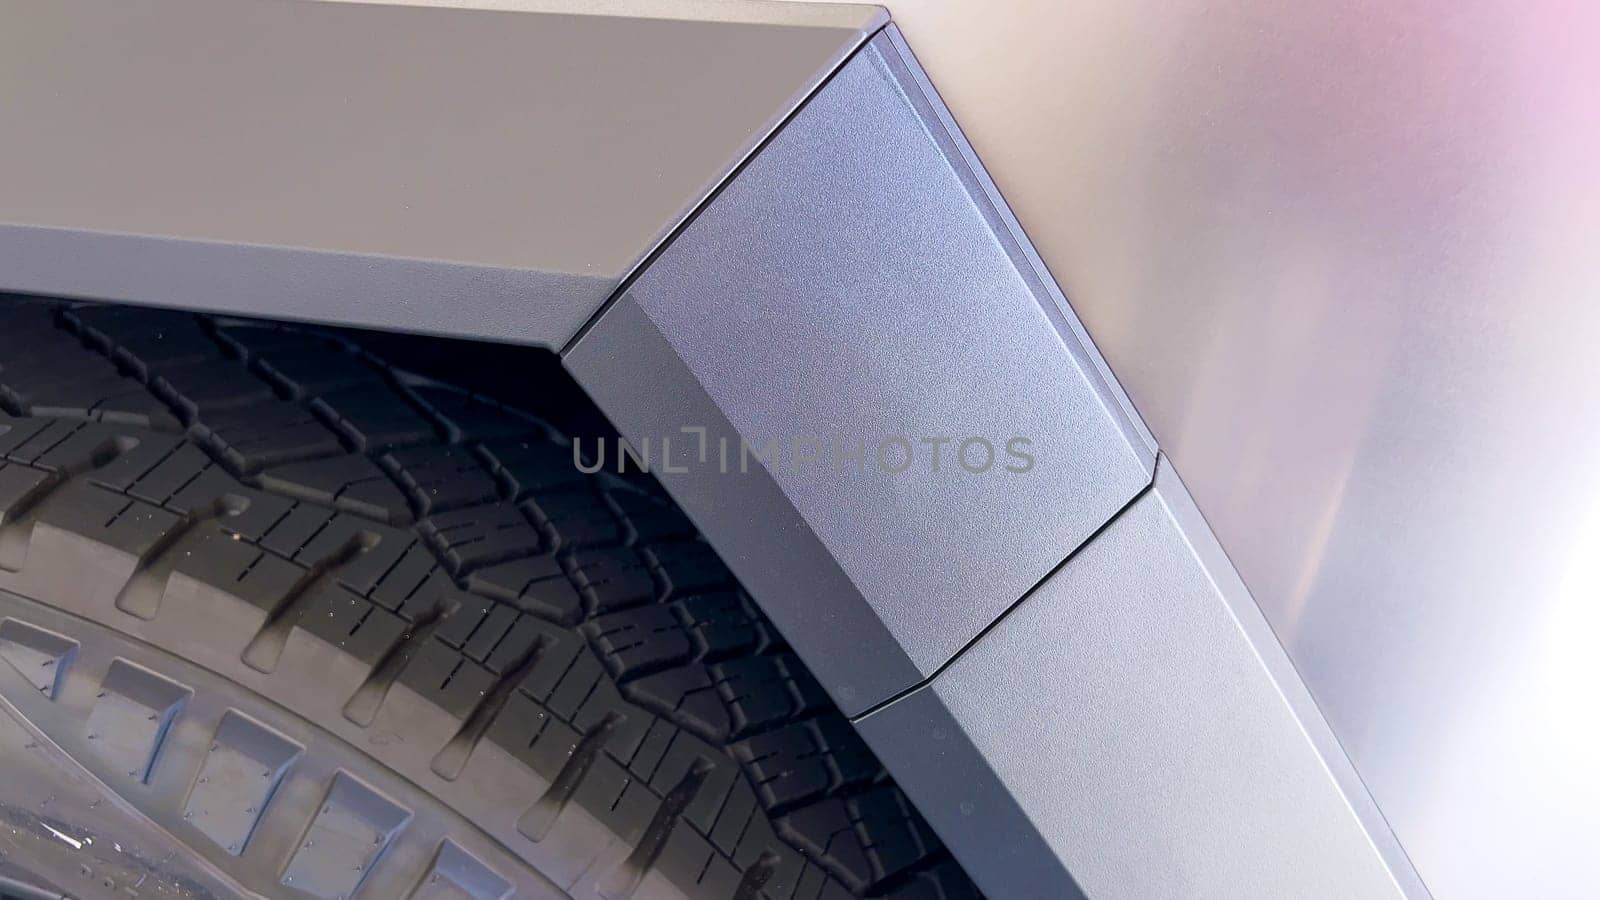 A close-up image emphasizing the sharp, angular design and textured metallic surface of the Tesla Cybertruck, showcasing the attention to detail in its robust and innovative construction.